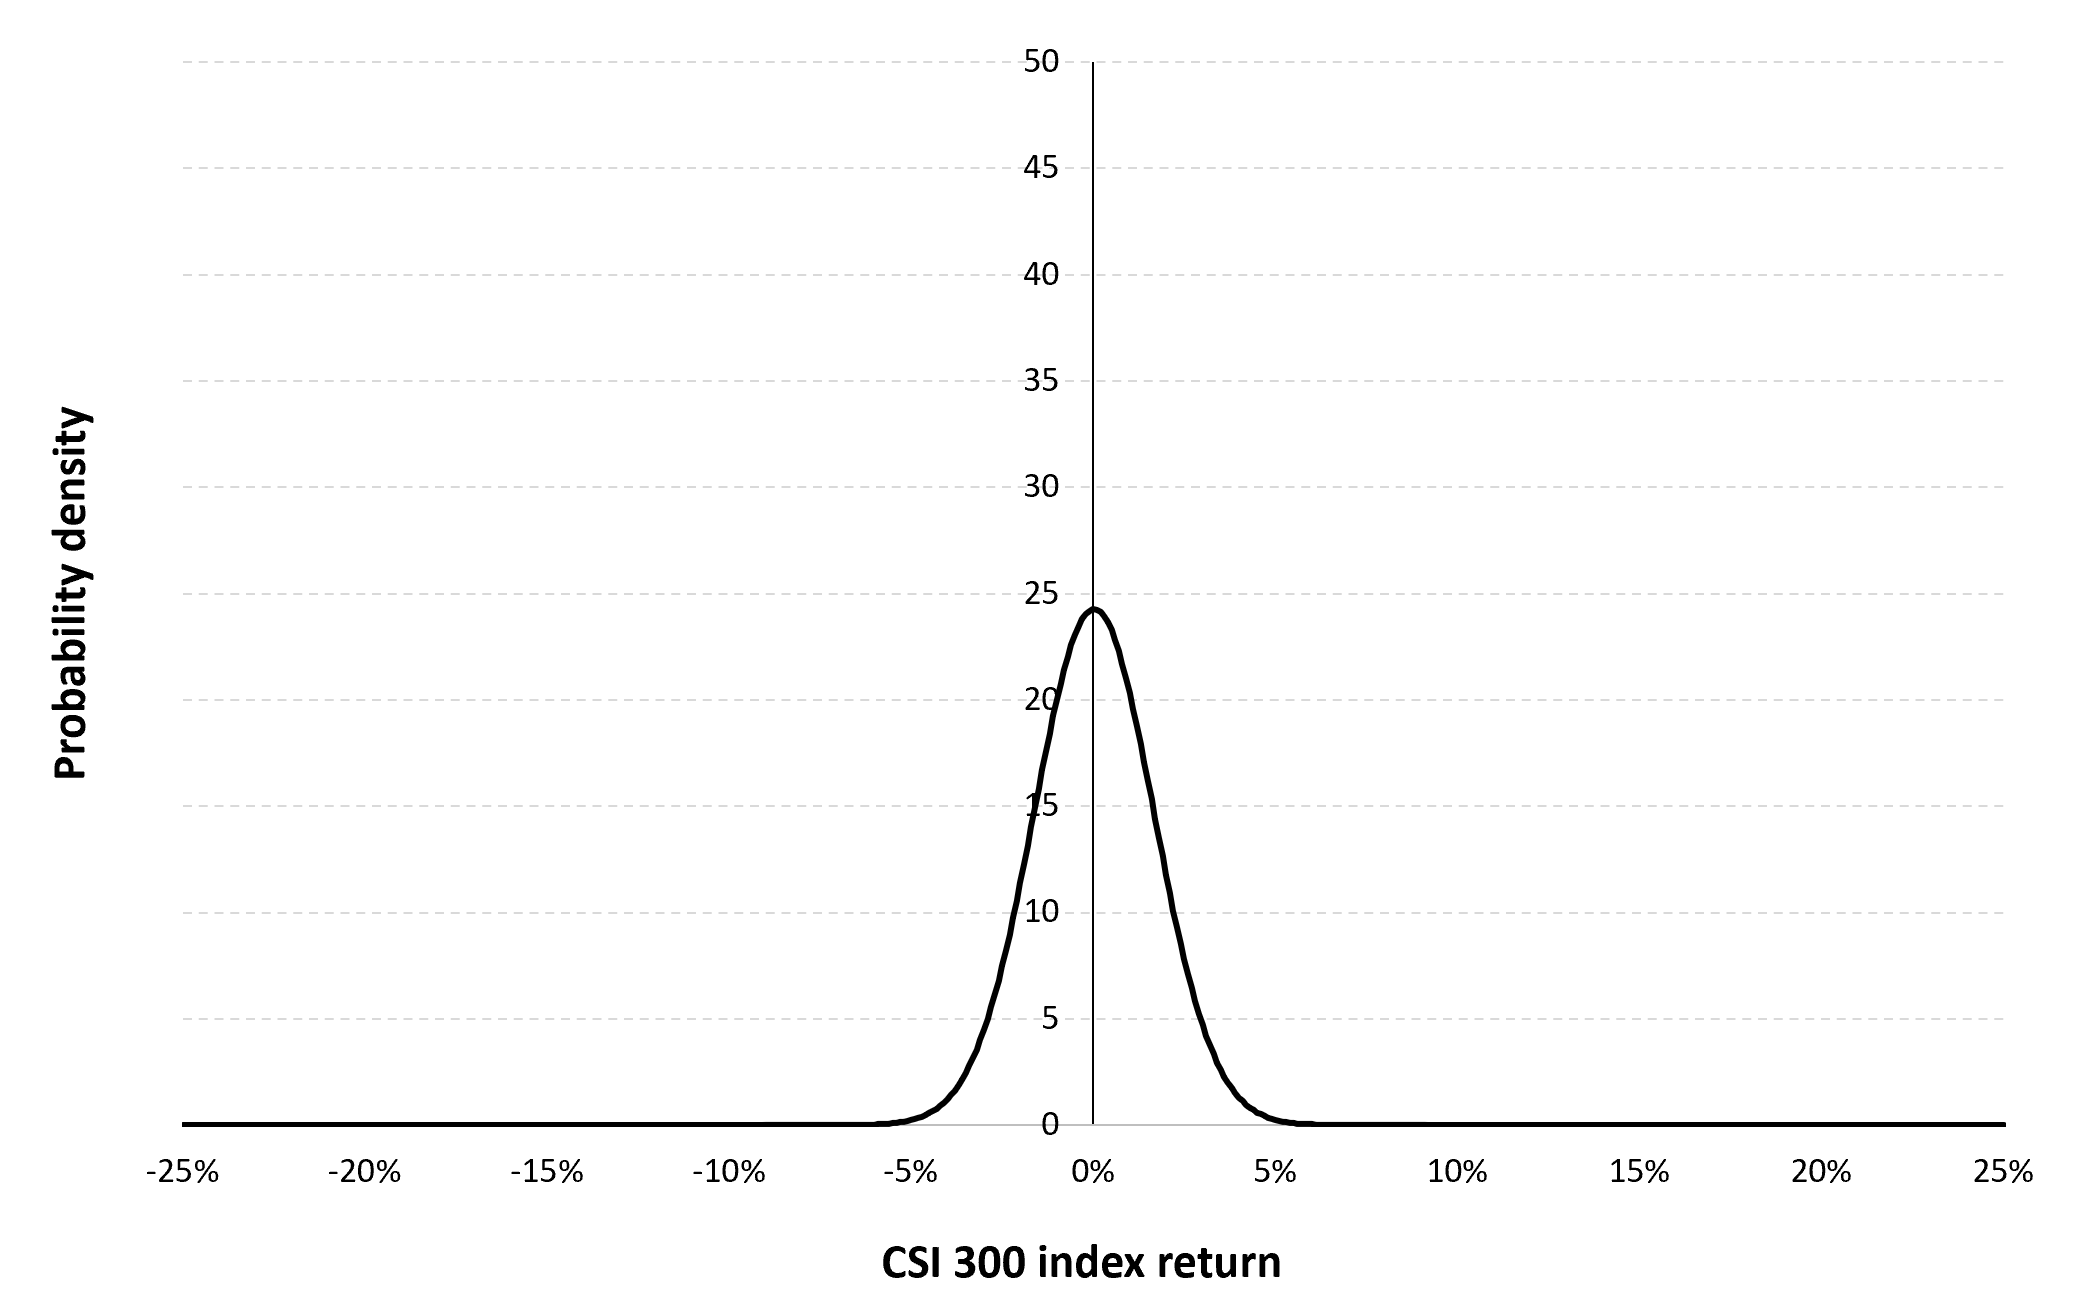 Gaussian distribution of the daily CSI 300 index returns